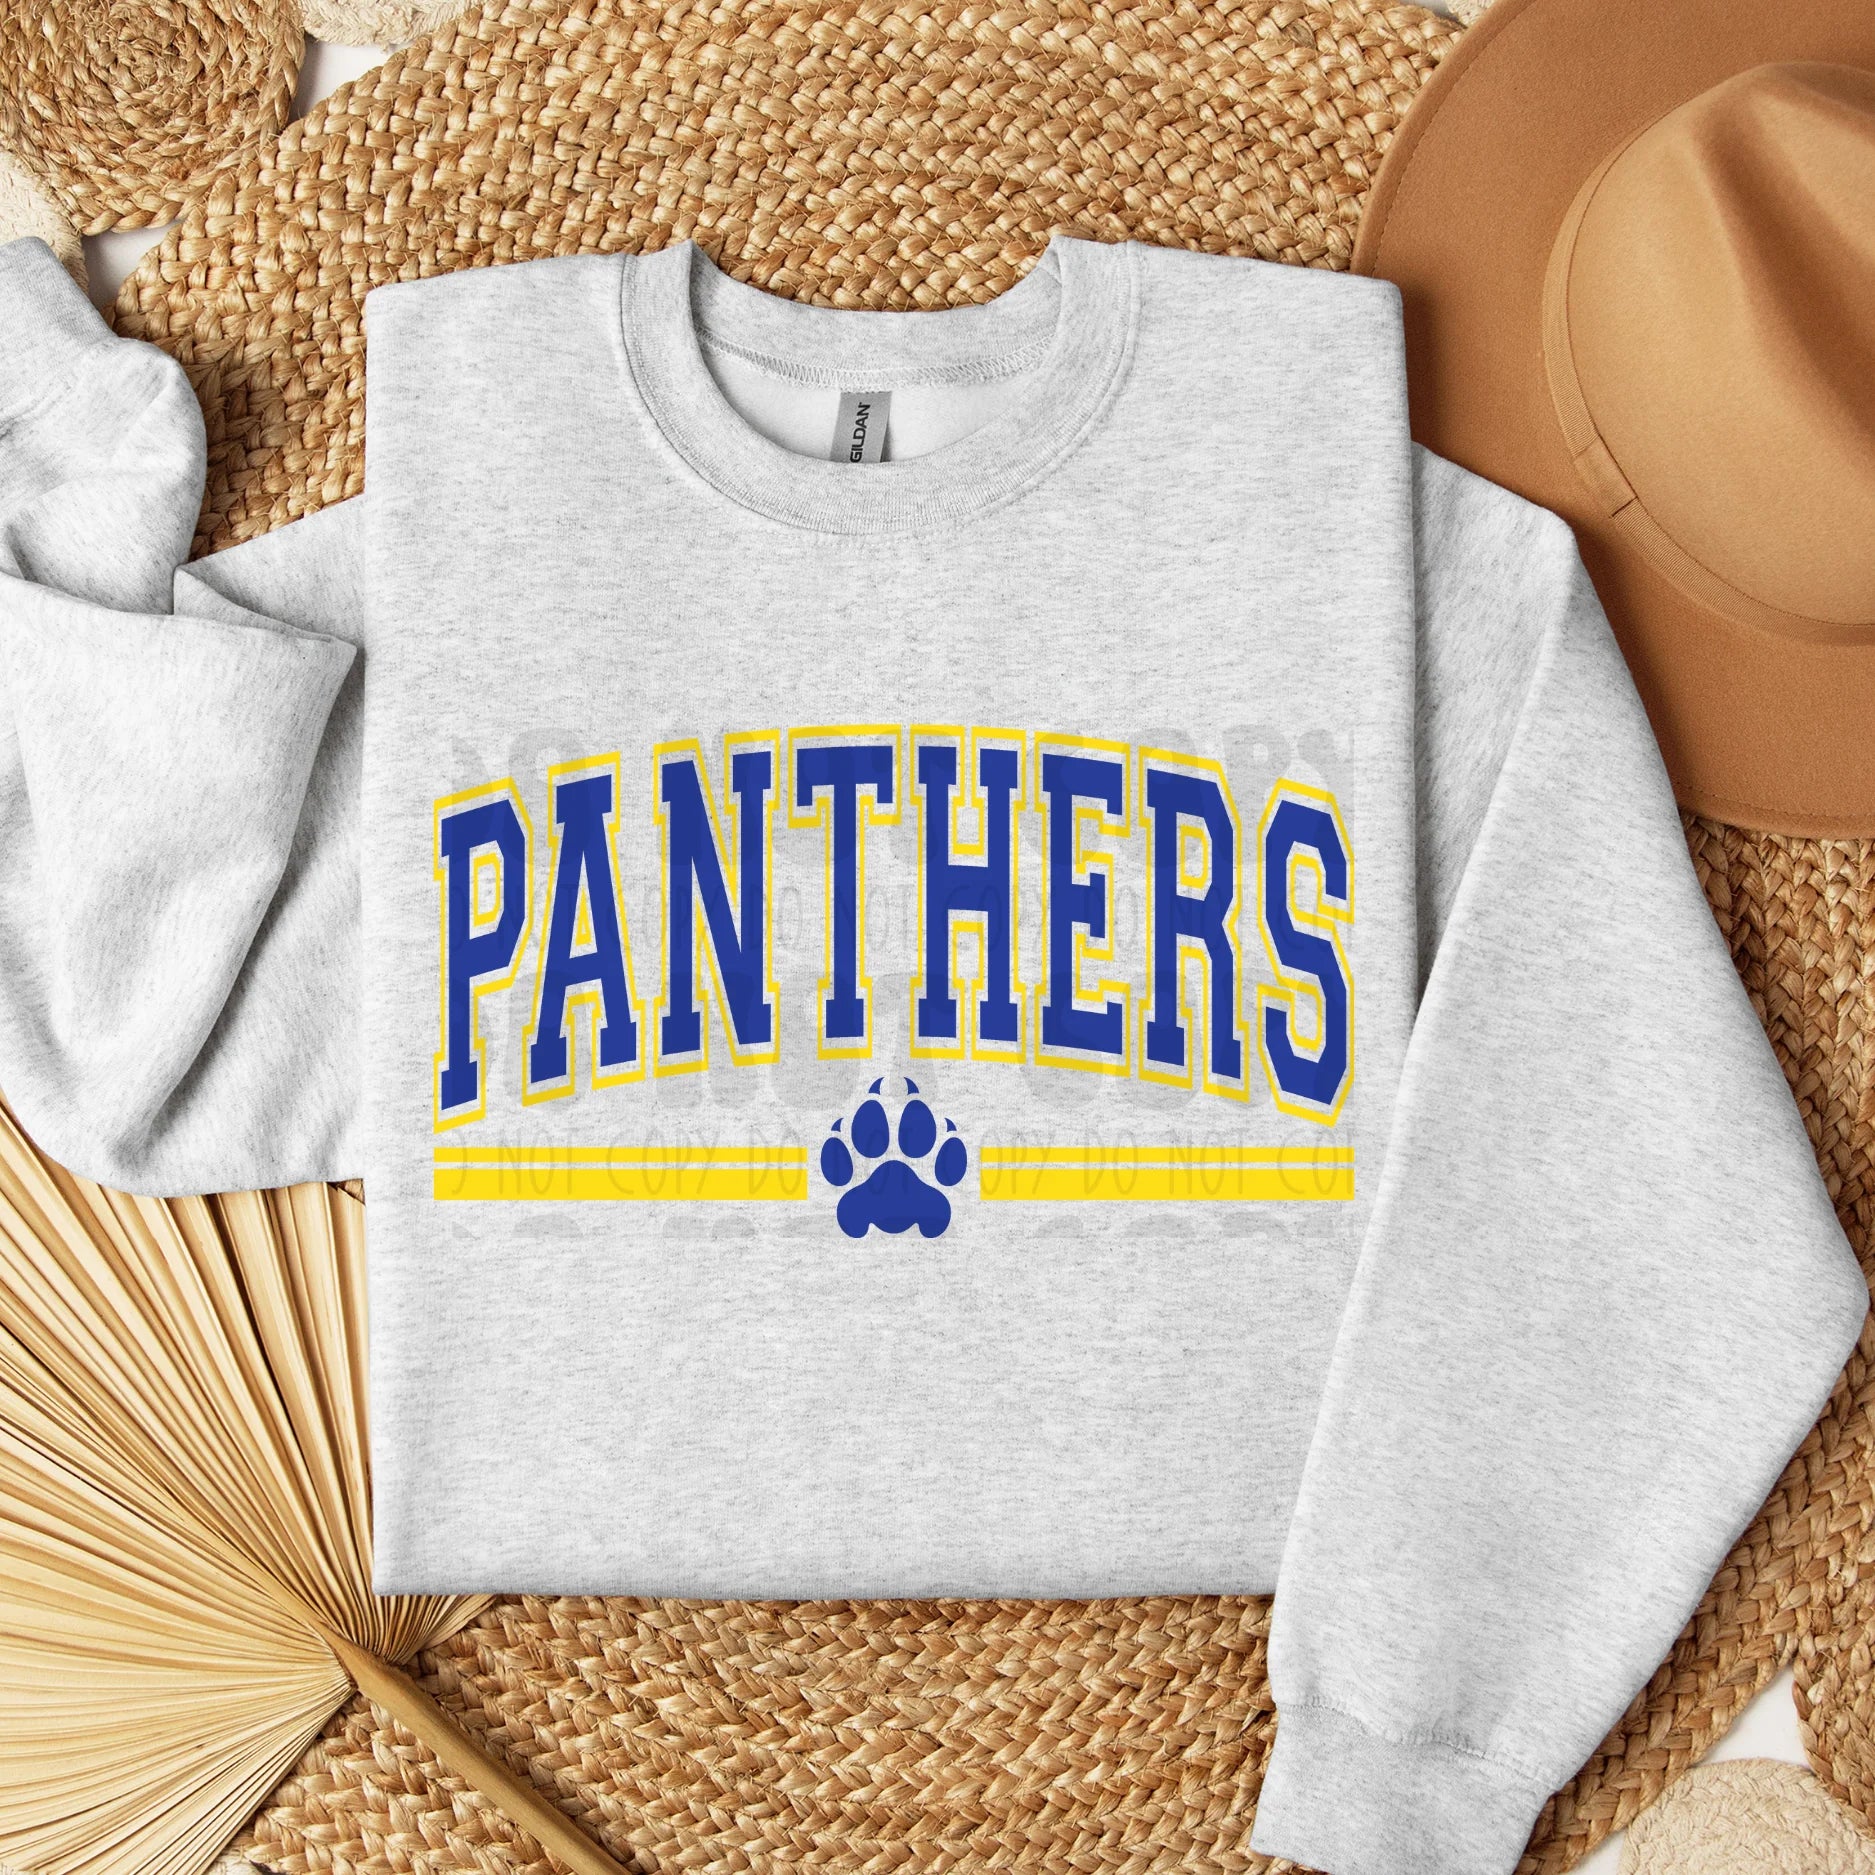 PRE-ORDER - PANTHERS MASCOT YOUTH - YOU CHOOSE COLOR